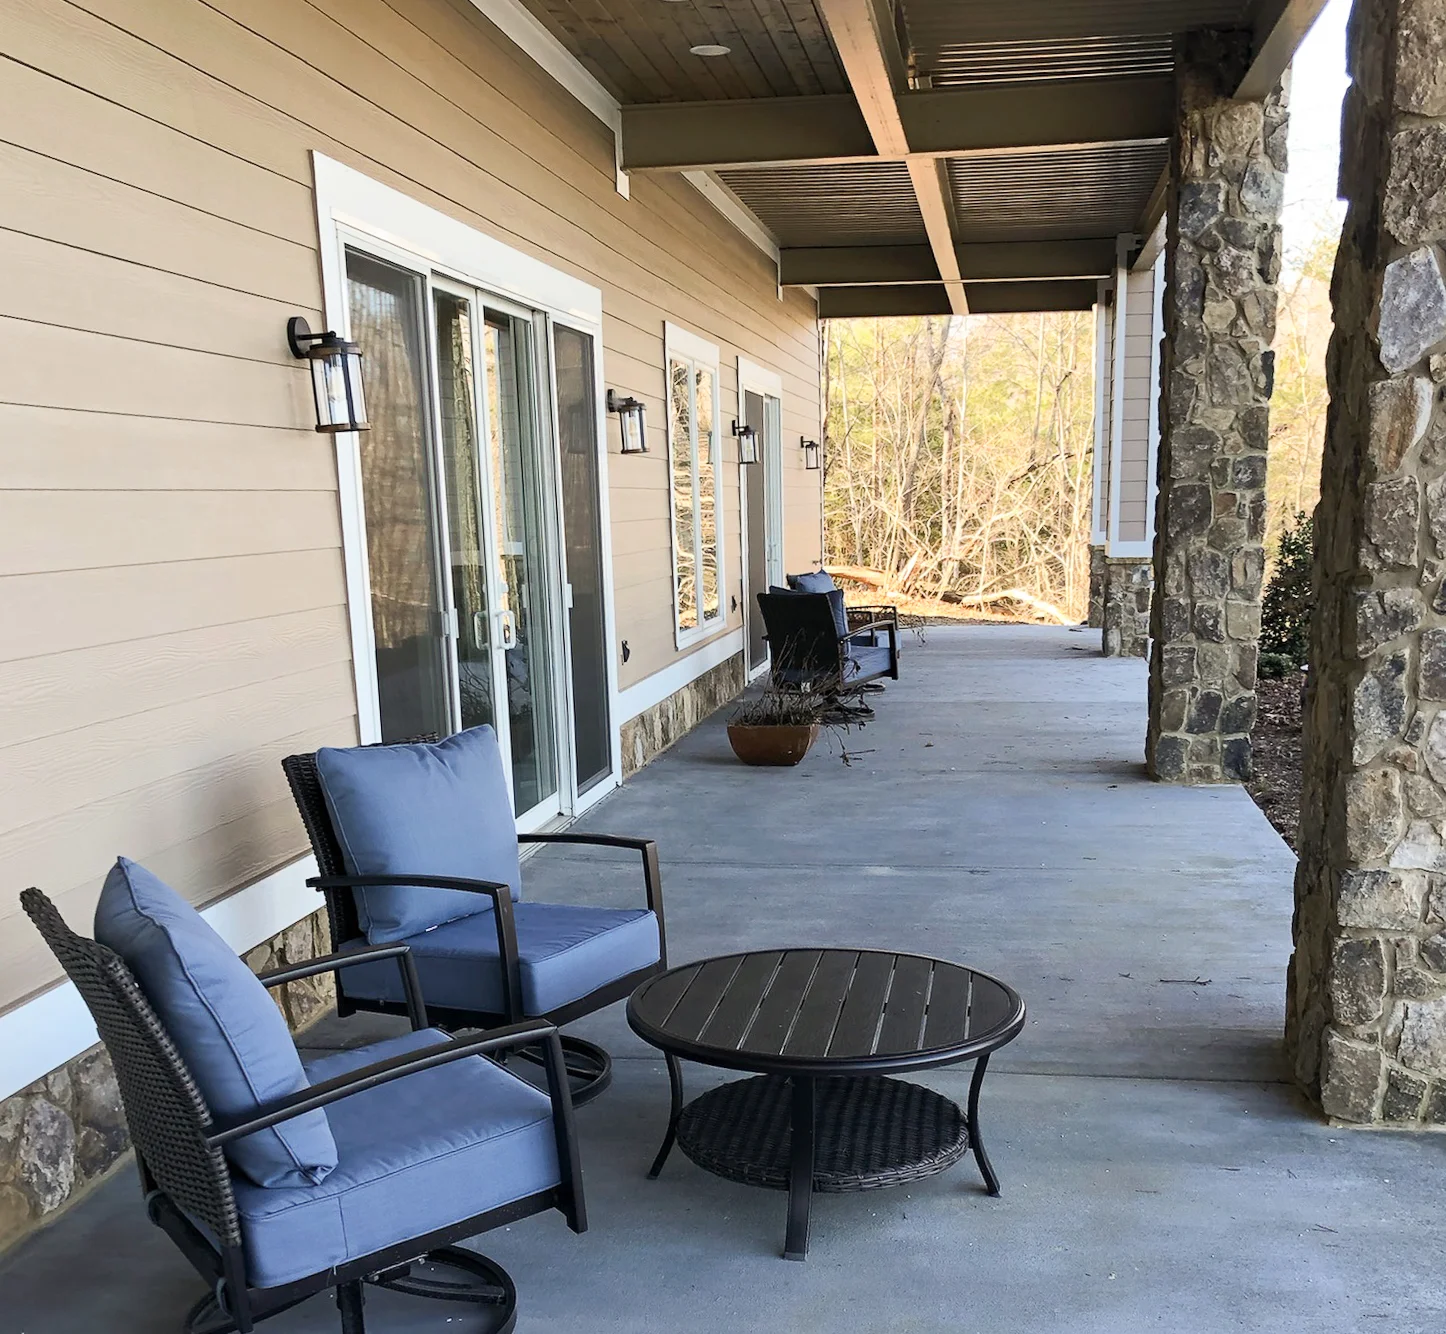 Serenity and Tranquility  patio with outdoor furniture at Riverside Bed and Breakfast.